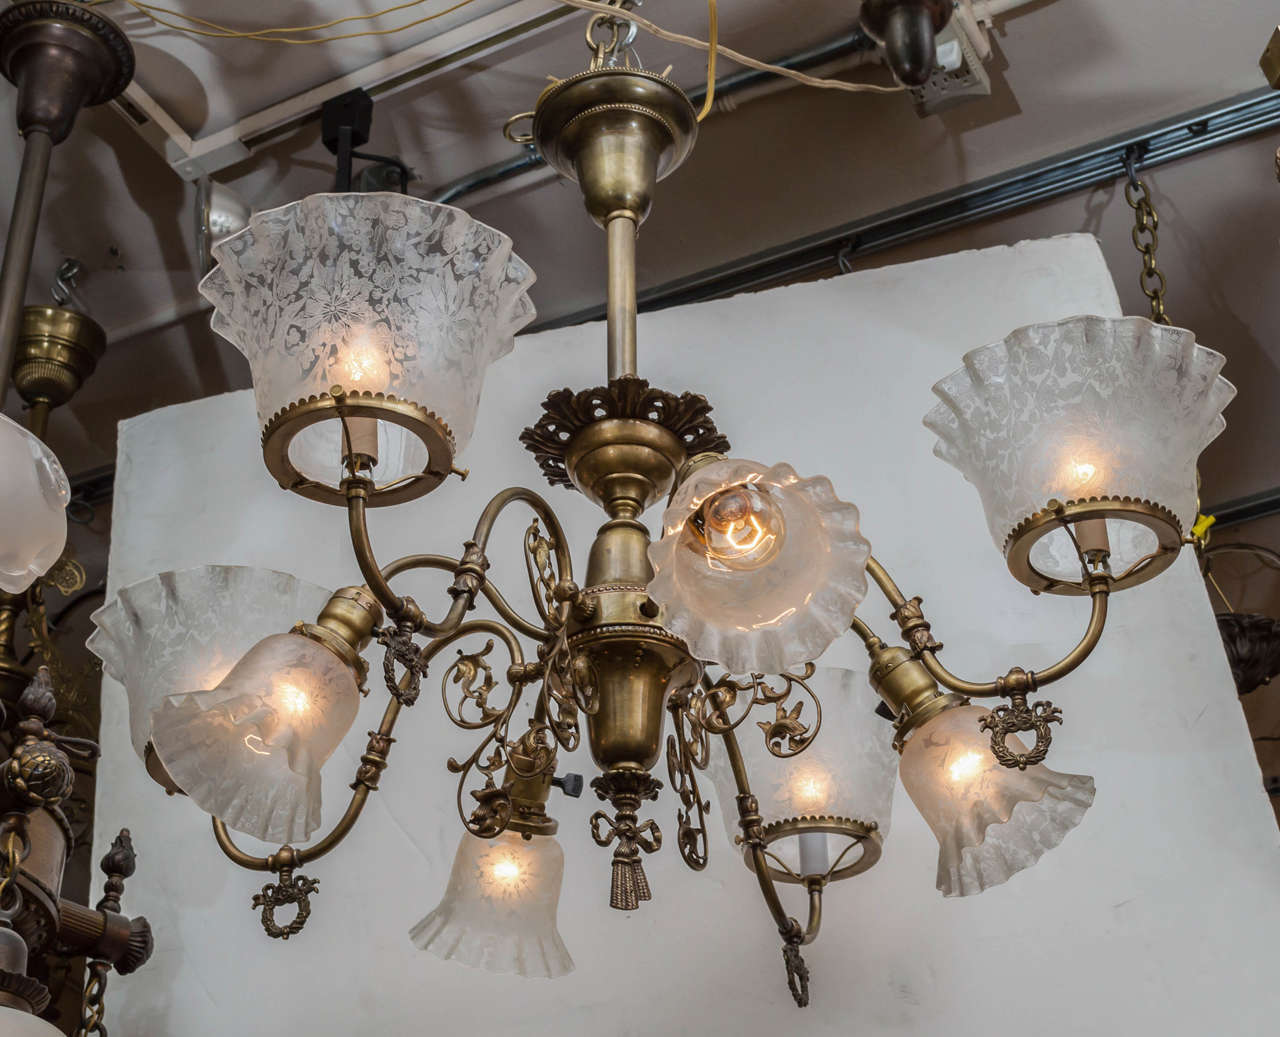 A nice example of a late Victorian chandelier. People love the combination gas and electric chandeliers, as they offer both up and down light. This chandelier has the best of the period shades that should accompany such a chandelier. The shades are